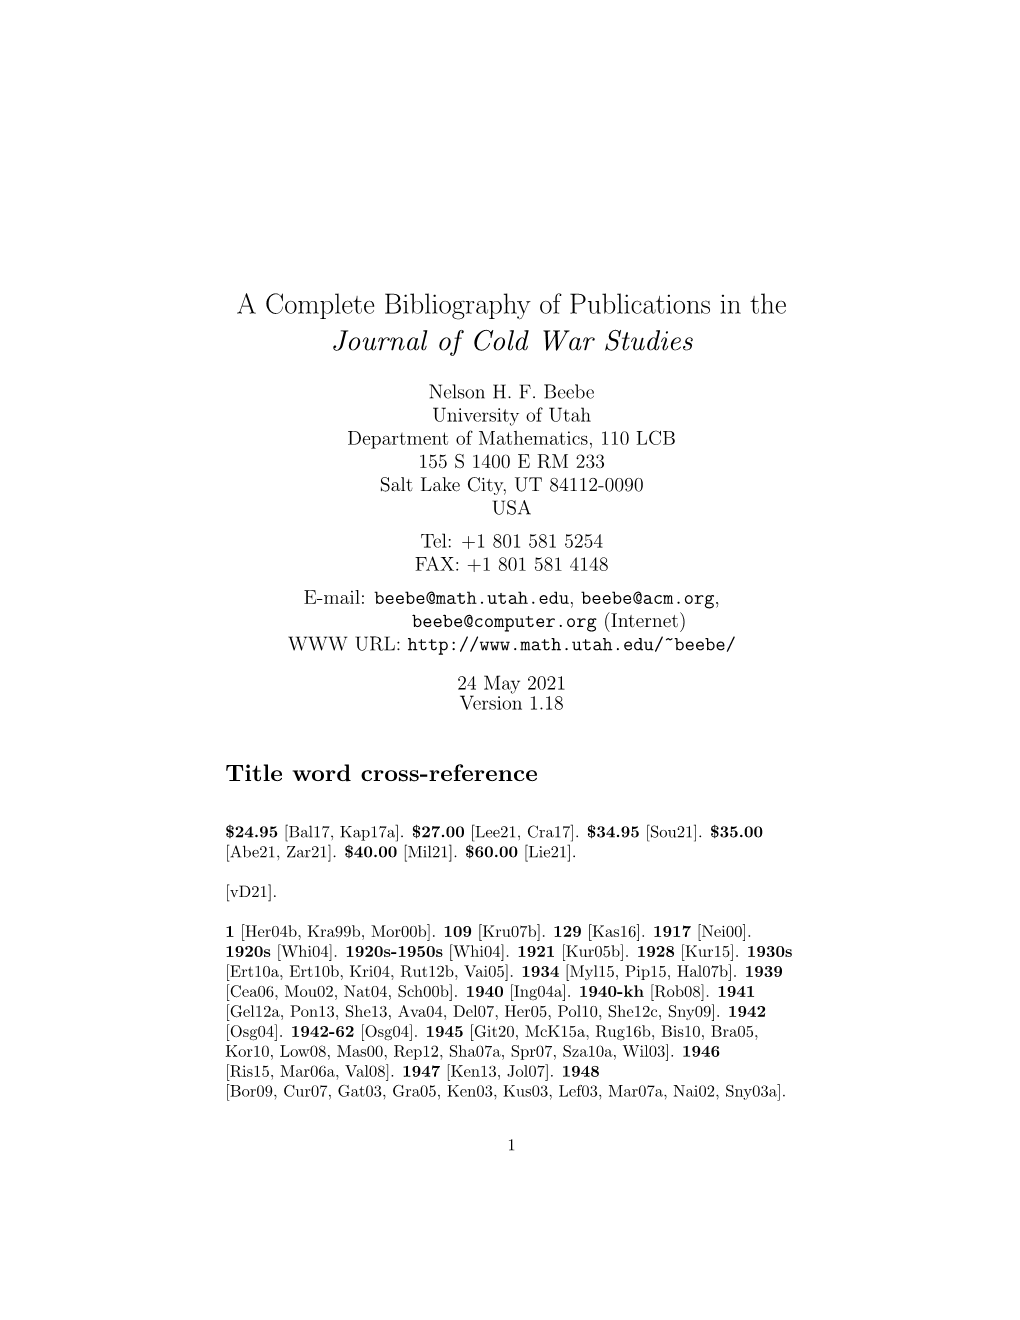 A Complete Bibliography of Publications in the Journal of Cold War Studies